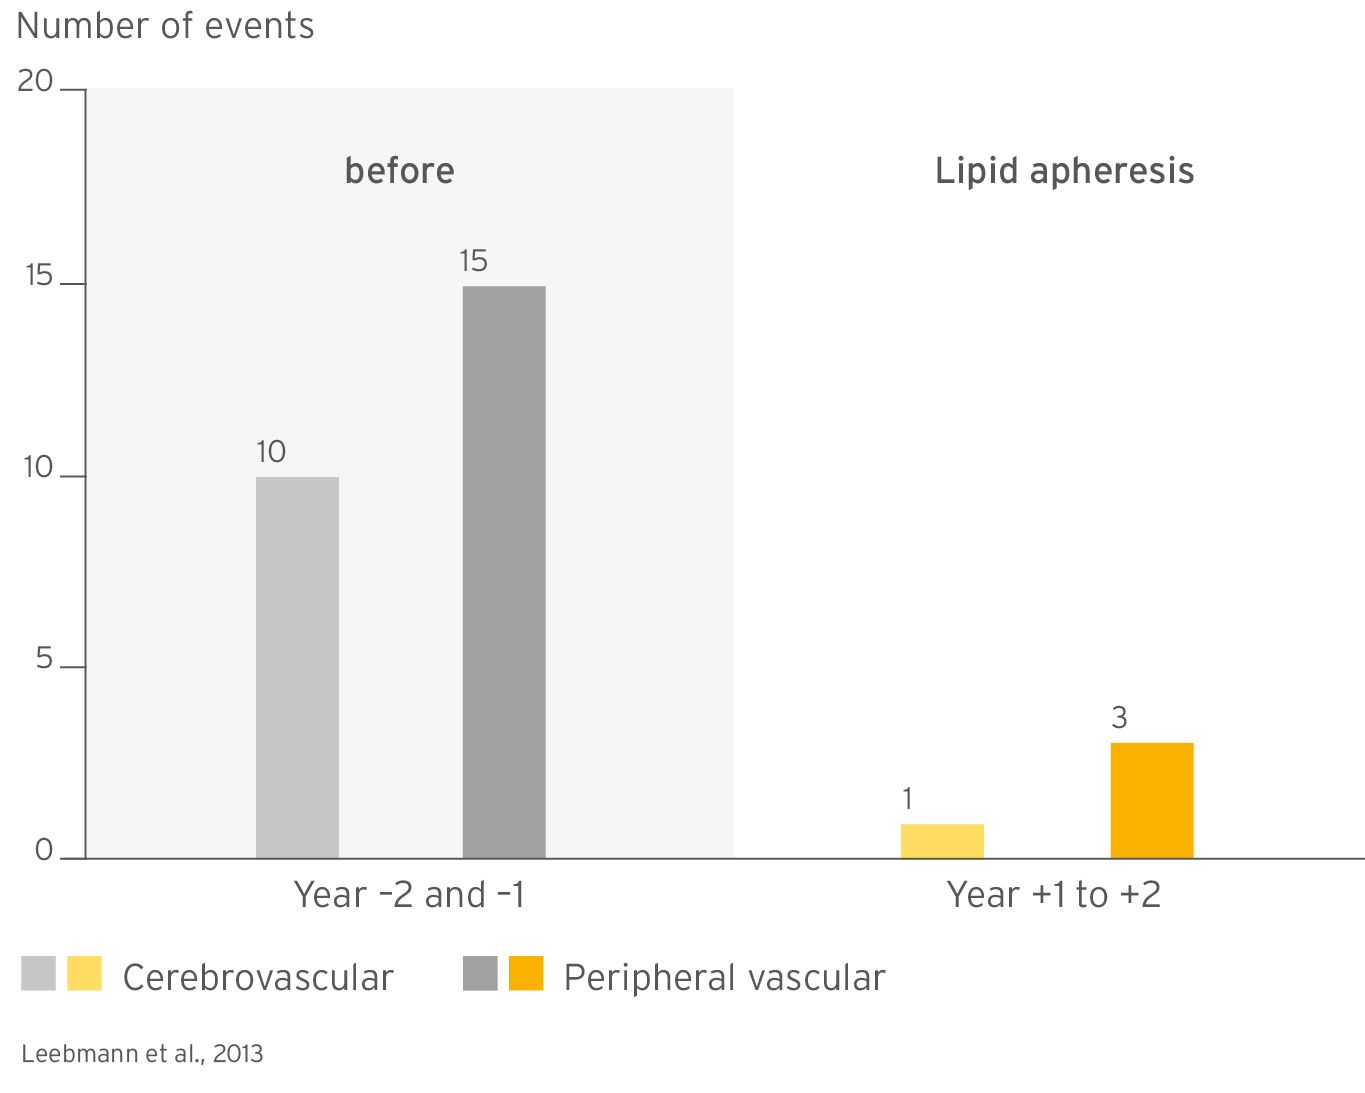 Cerebrovascular and peripheral vascular events